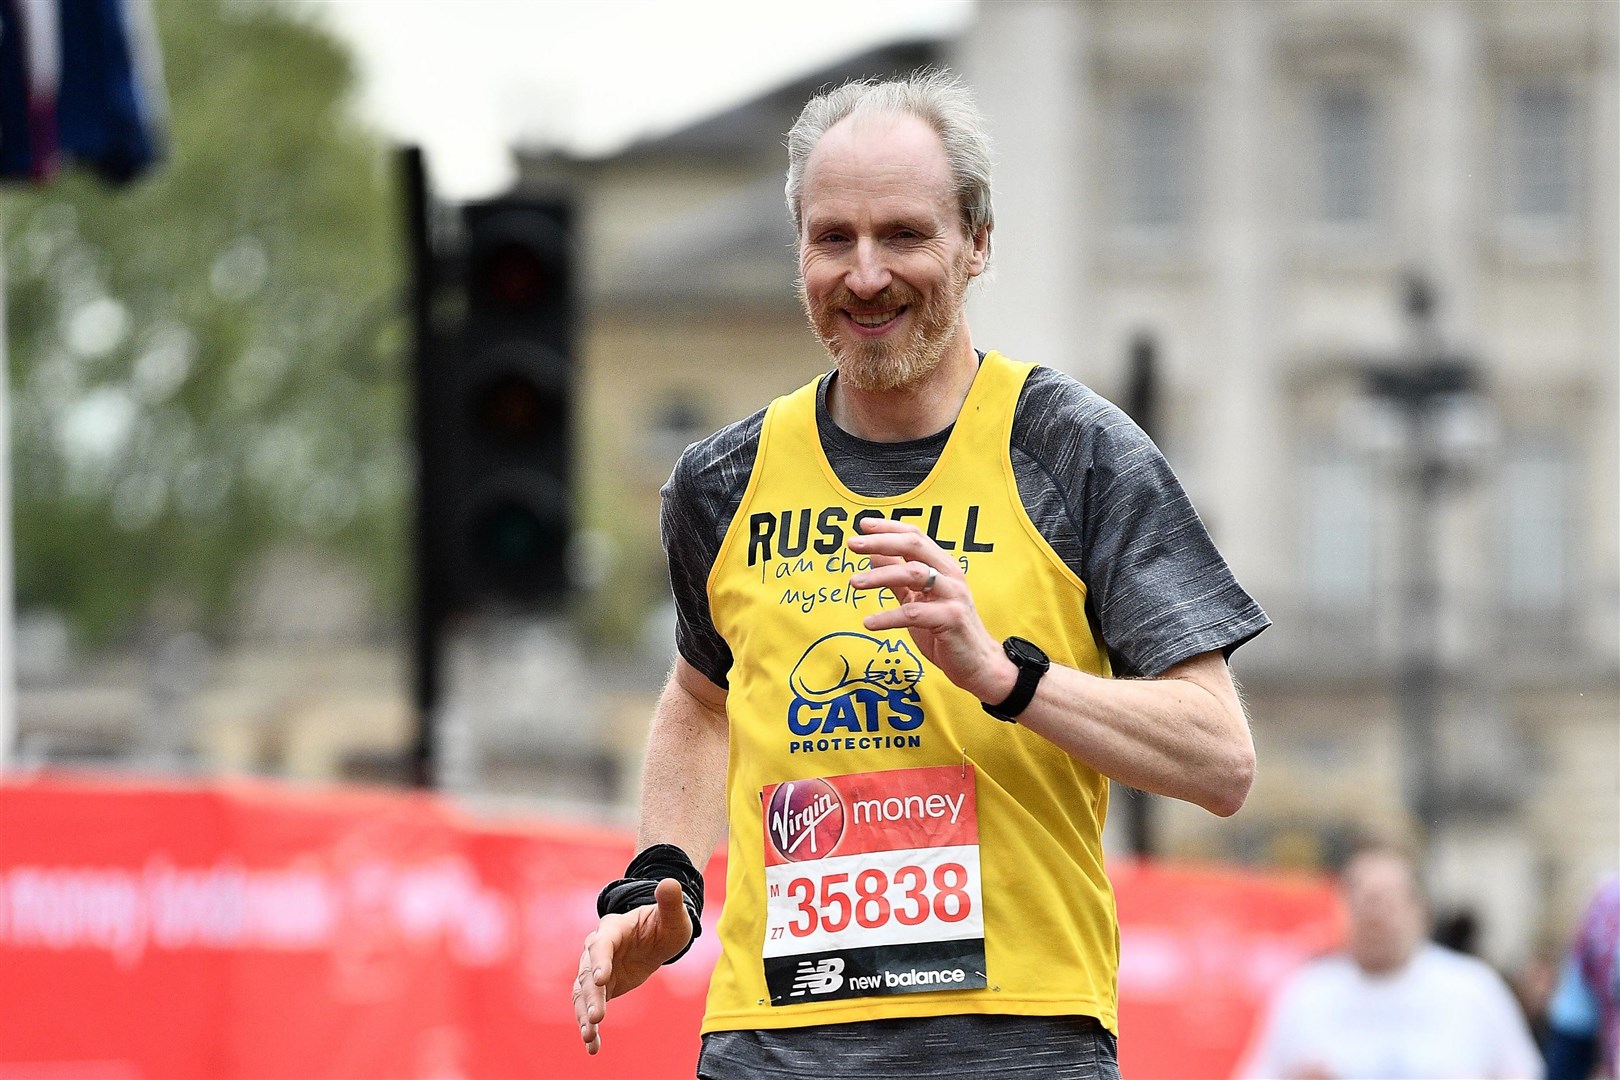 Finish line in sight for Russell at the 2019 London Marathon.